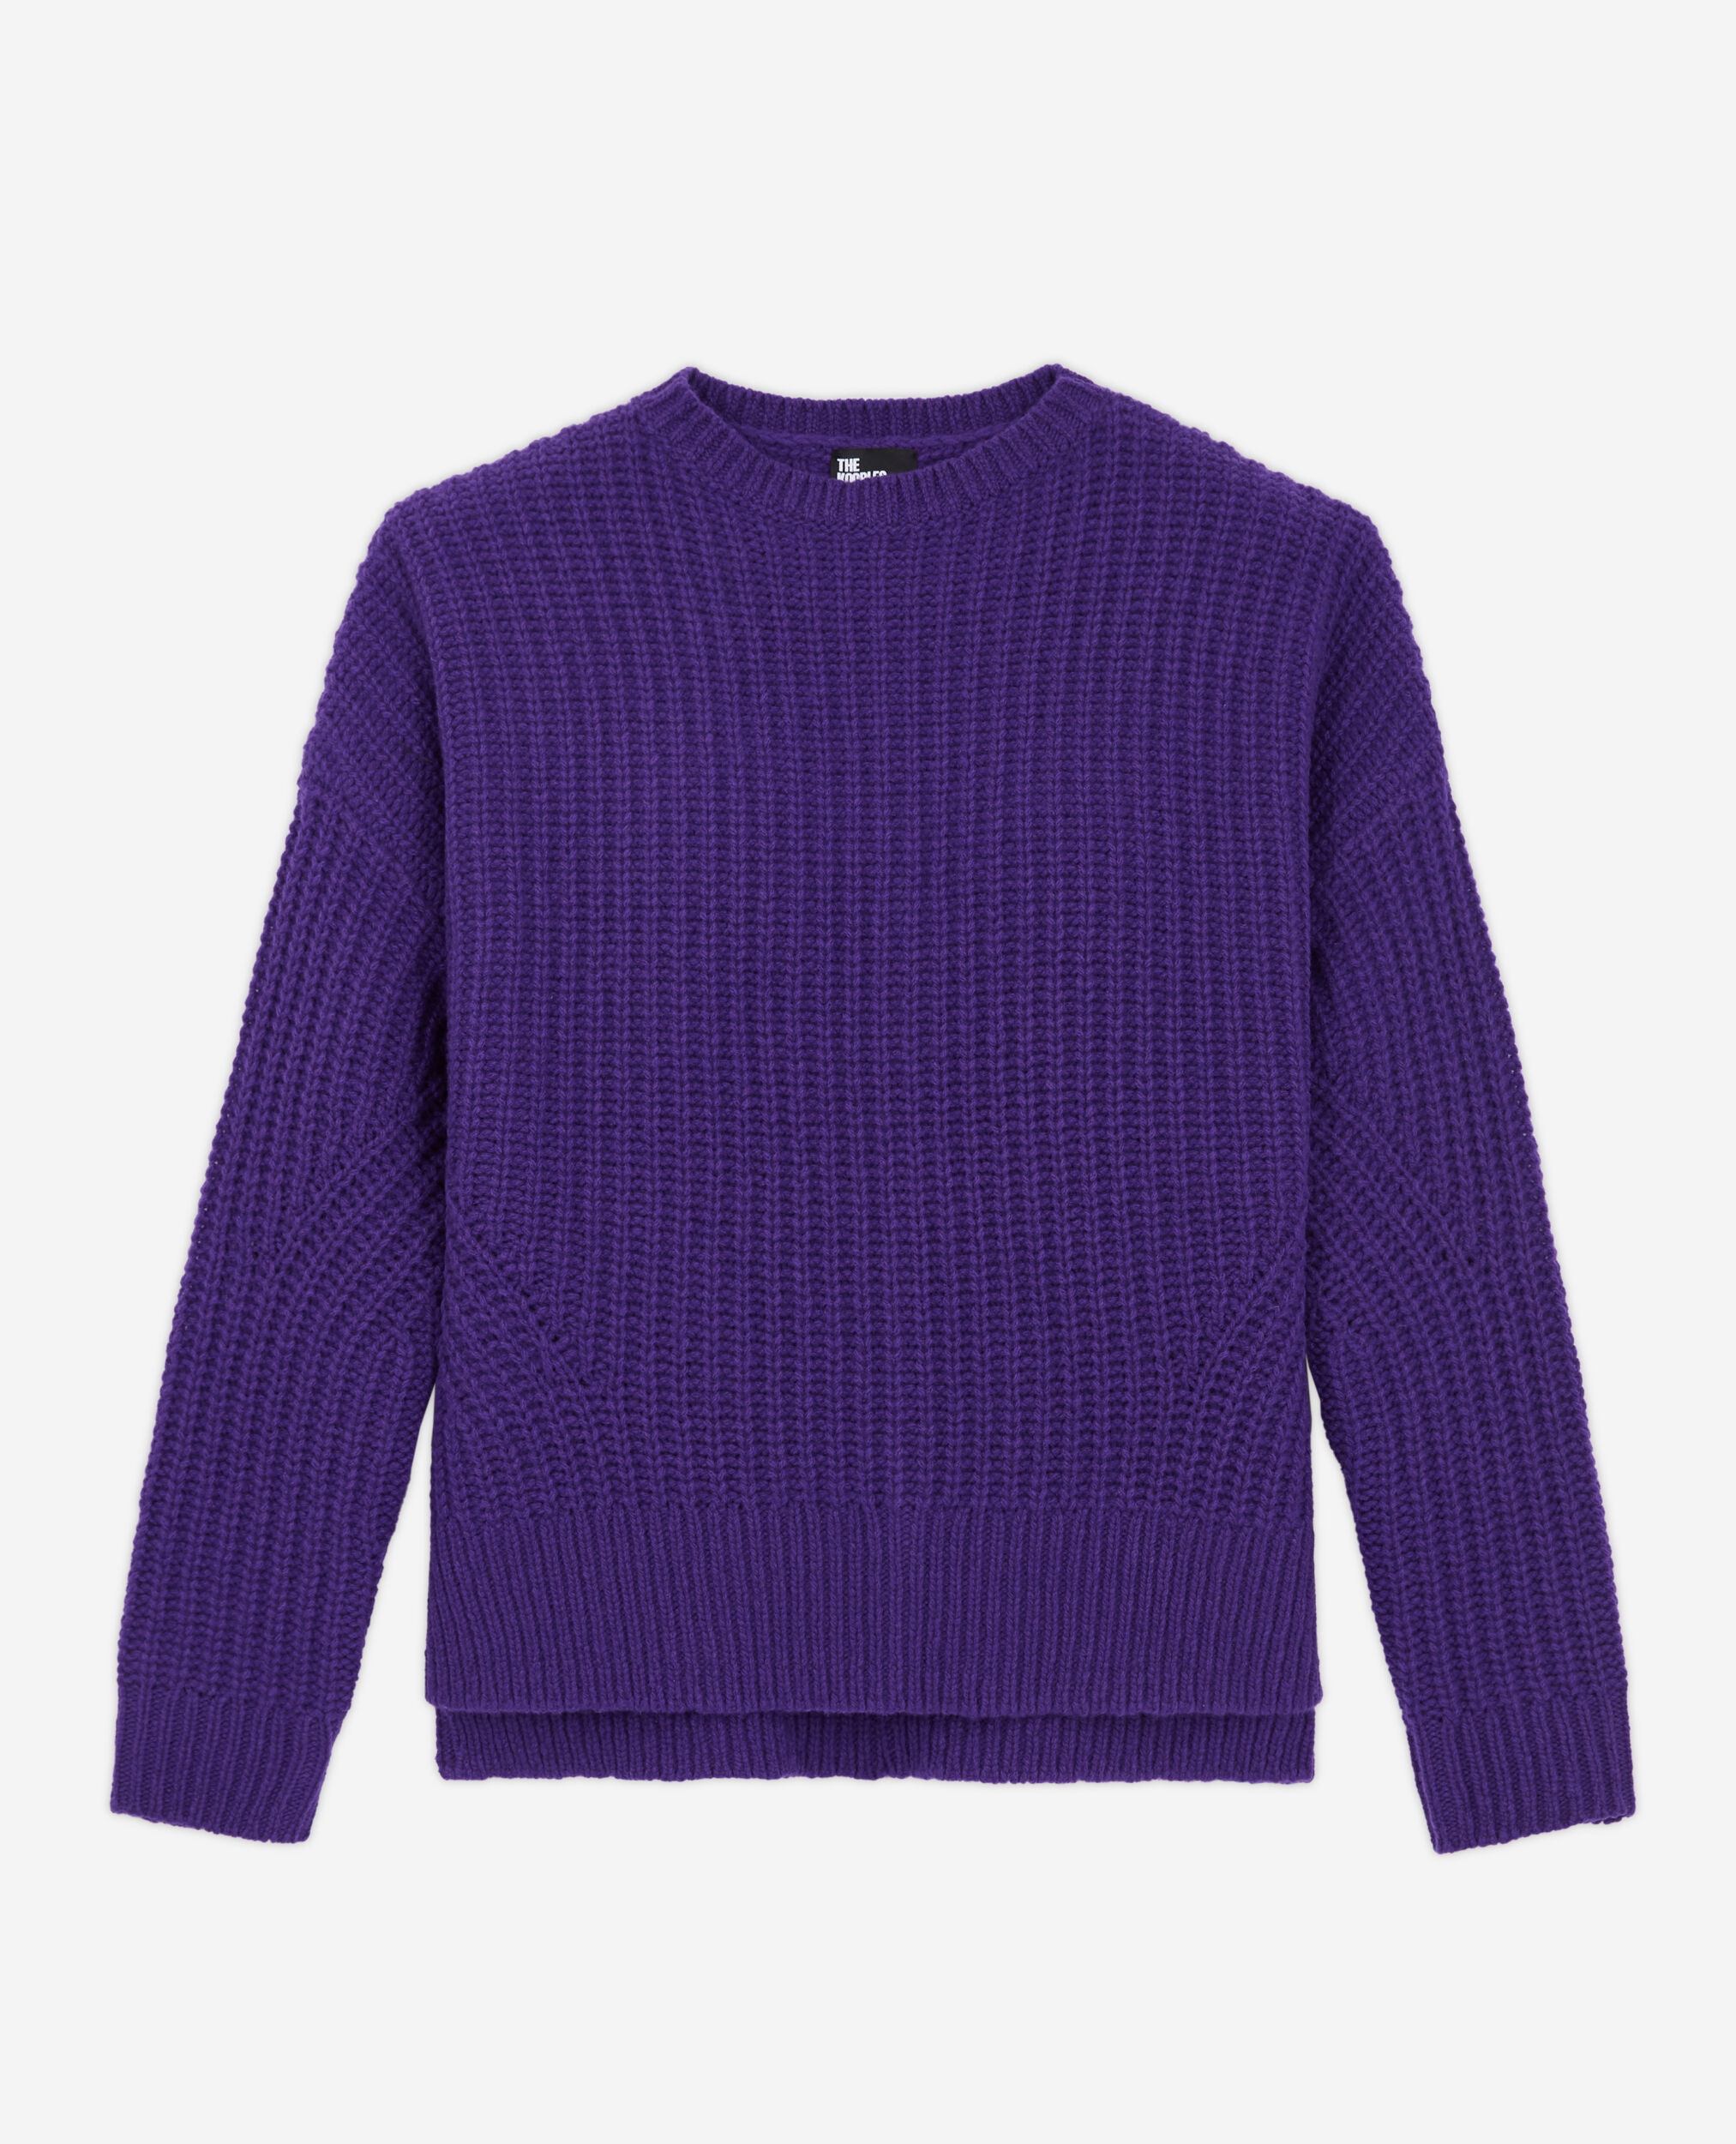 Lilafarbener Wollpullover, PURPLE, hi-res image number null